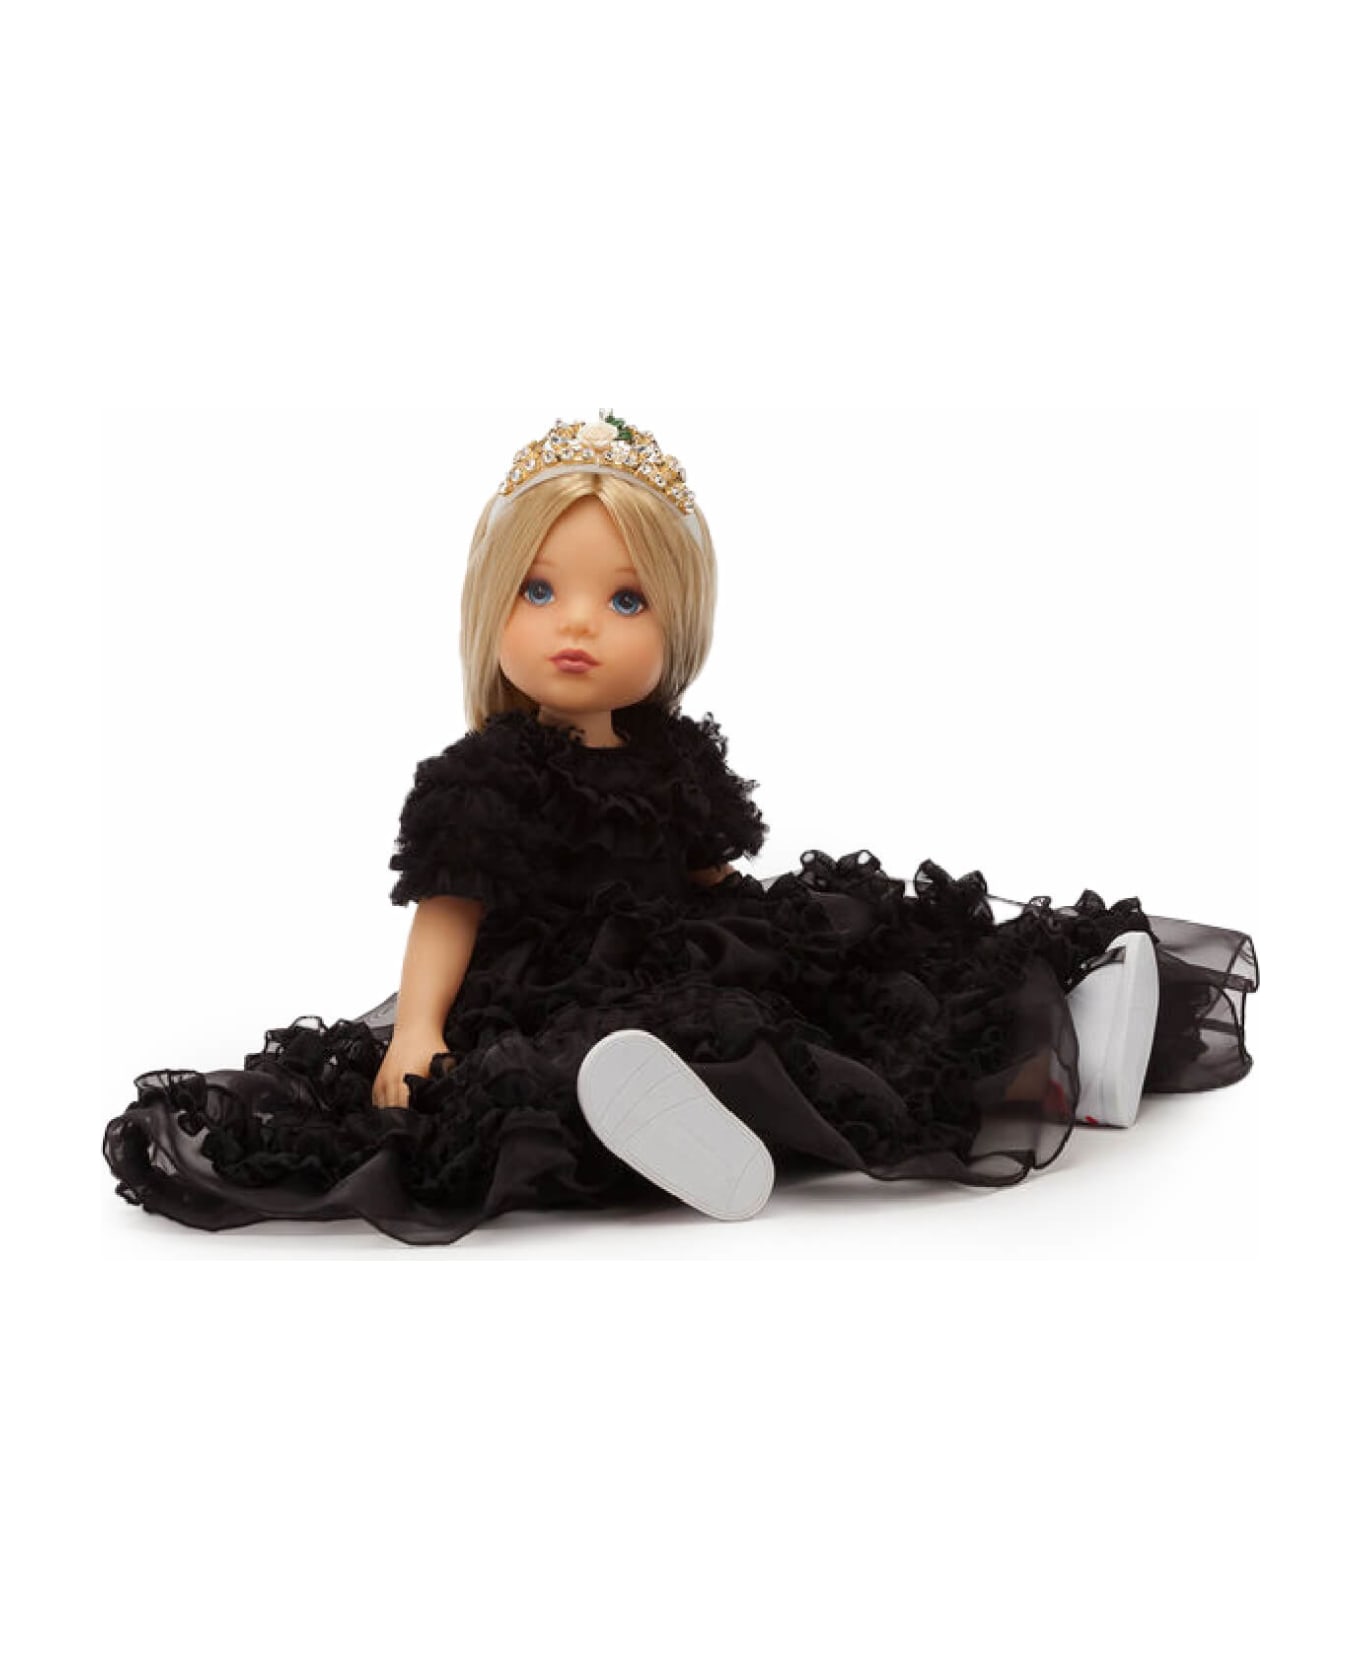 Dolce & Gabbana Colorful Doll For Girl With Black Dress